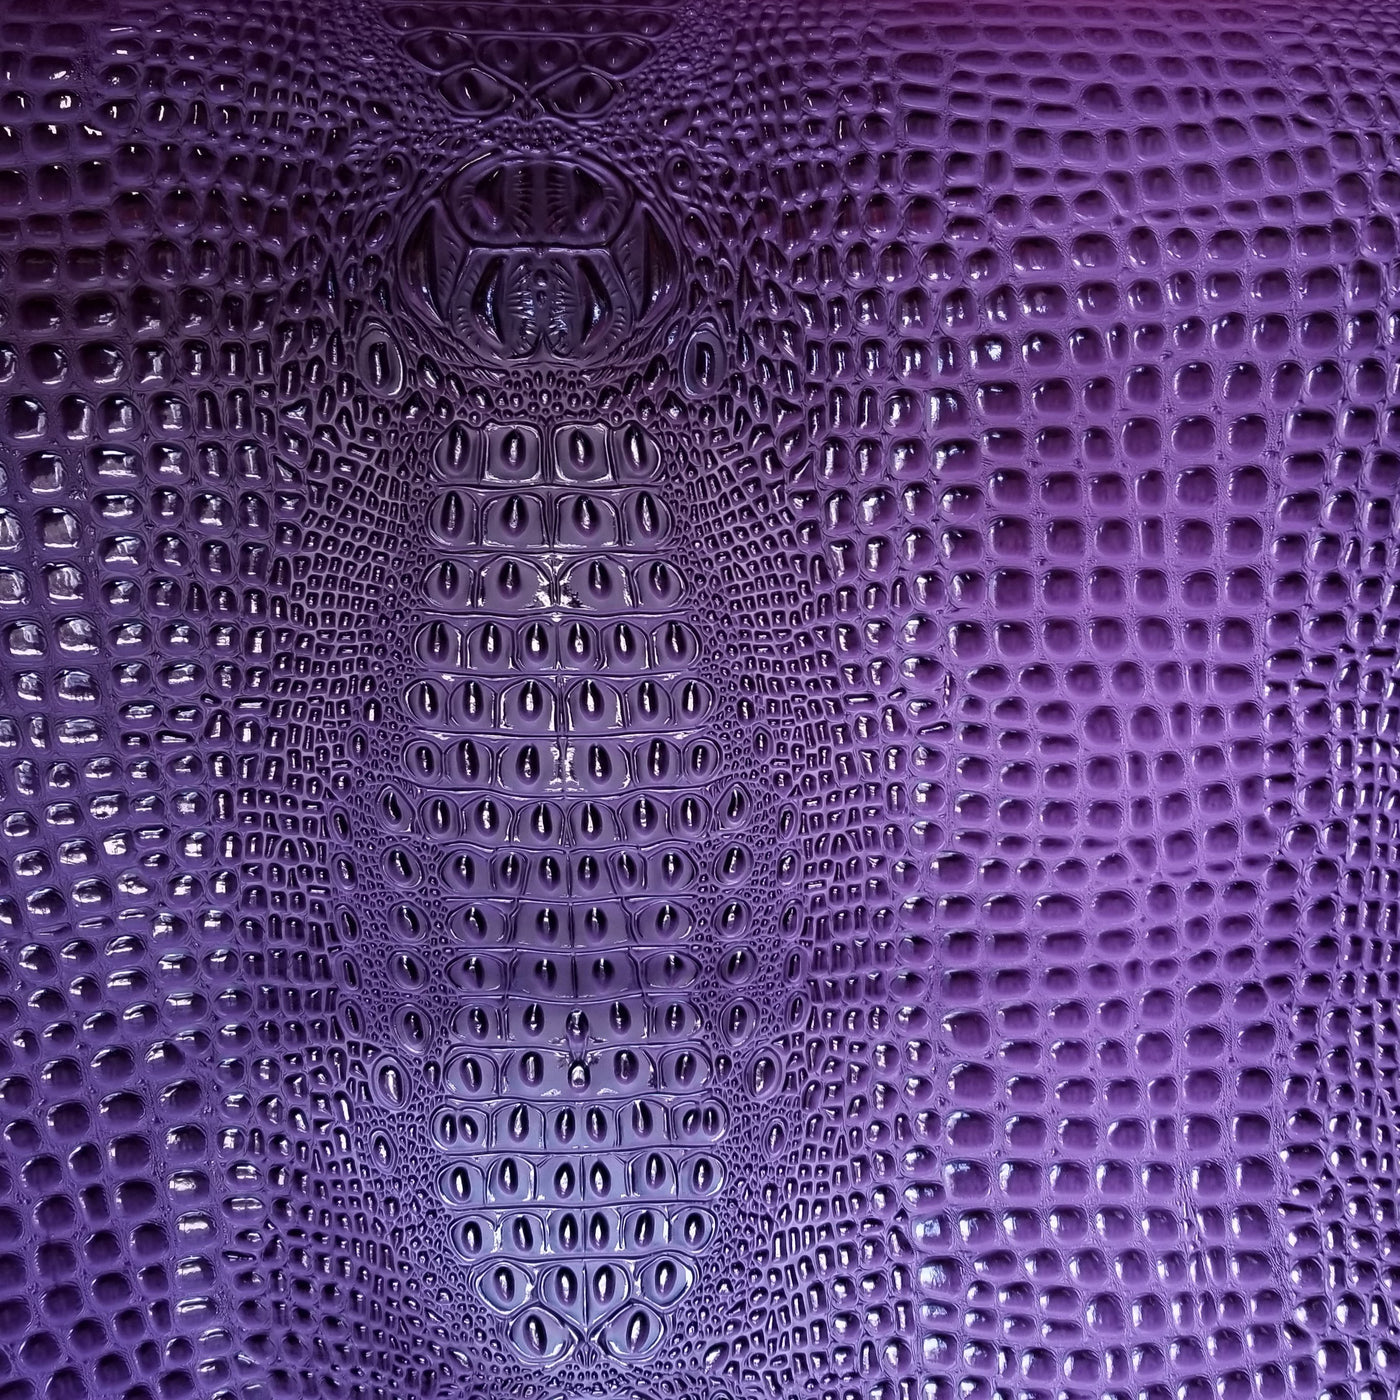 VIOLET - Glossy Faux Snake Skin Upholstery Vinyl Fabric | CROCCO | BTY 